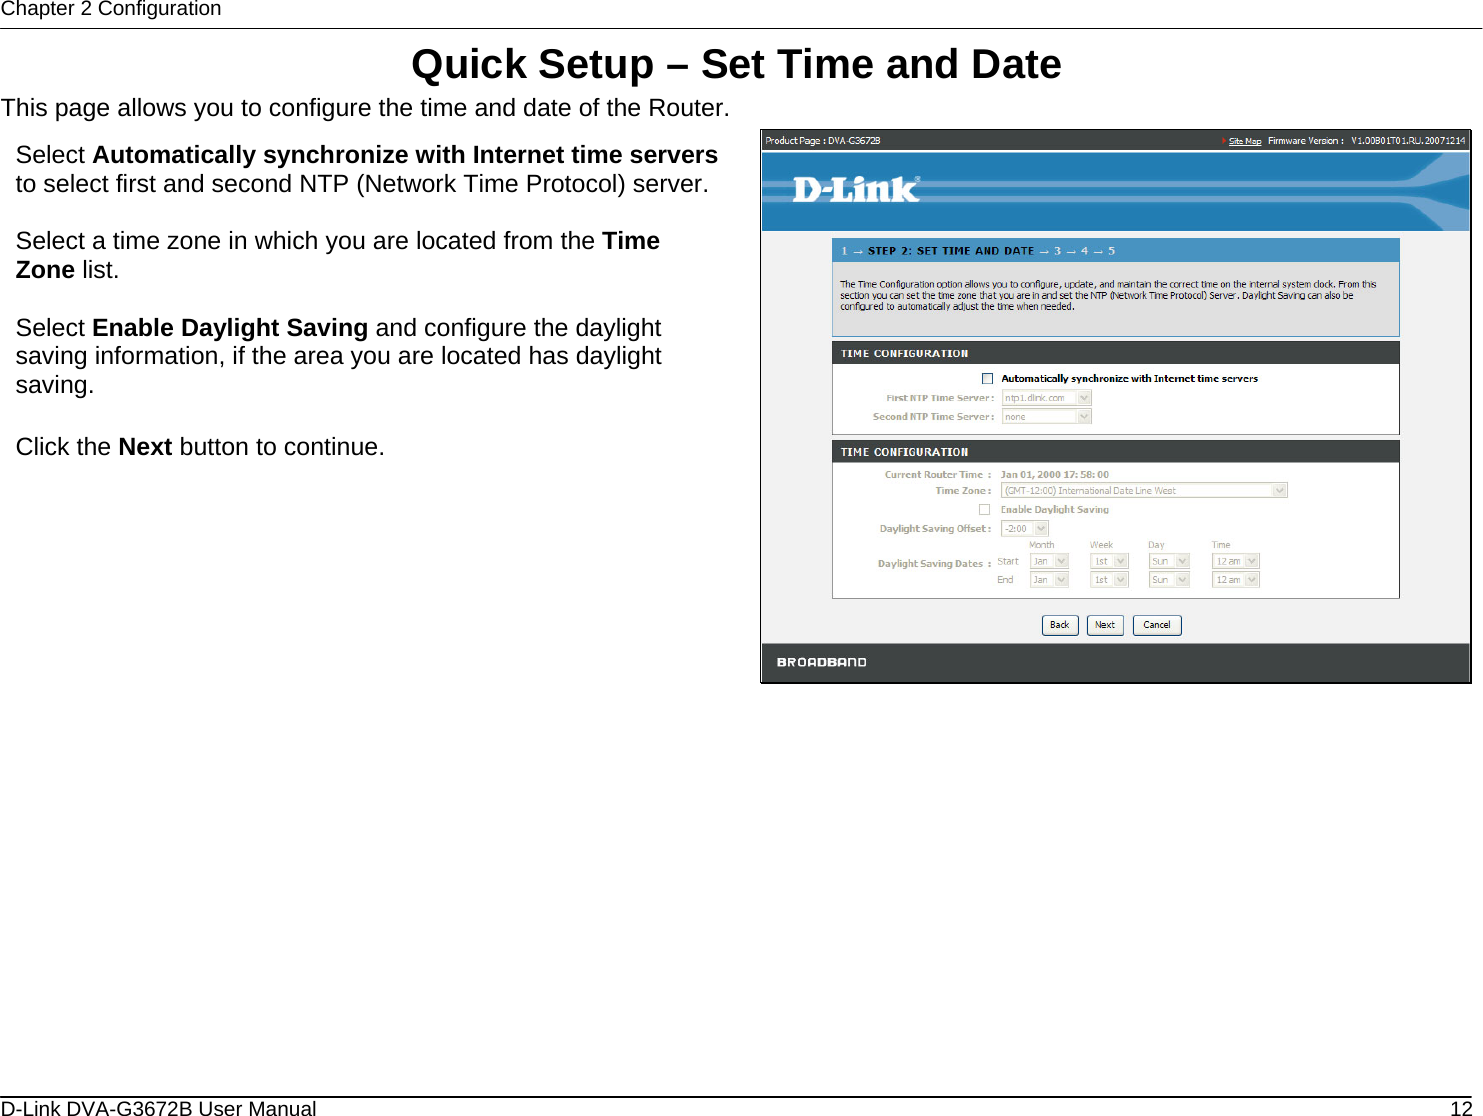 Chapter 2 Configuration Quick Setup – Set Time and Date This page allows you to configure the time and date of the Router.  Select Automatically synchronize with Internet time serversto select first and second NTP (Network Time Protocol) server. Select a time zone in which you are located from the Time Zone list.  Select Enable Daylight Saving and configure the daylight saving information, if the area you are located has daylight saving.  Click the Next button to continue.              D-Link DVA-G3672B User Manual  12